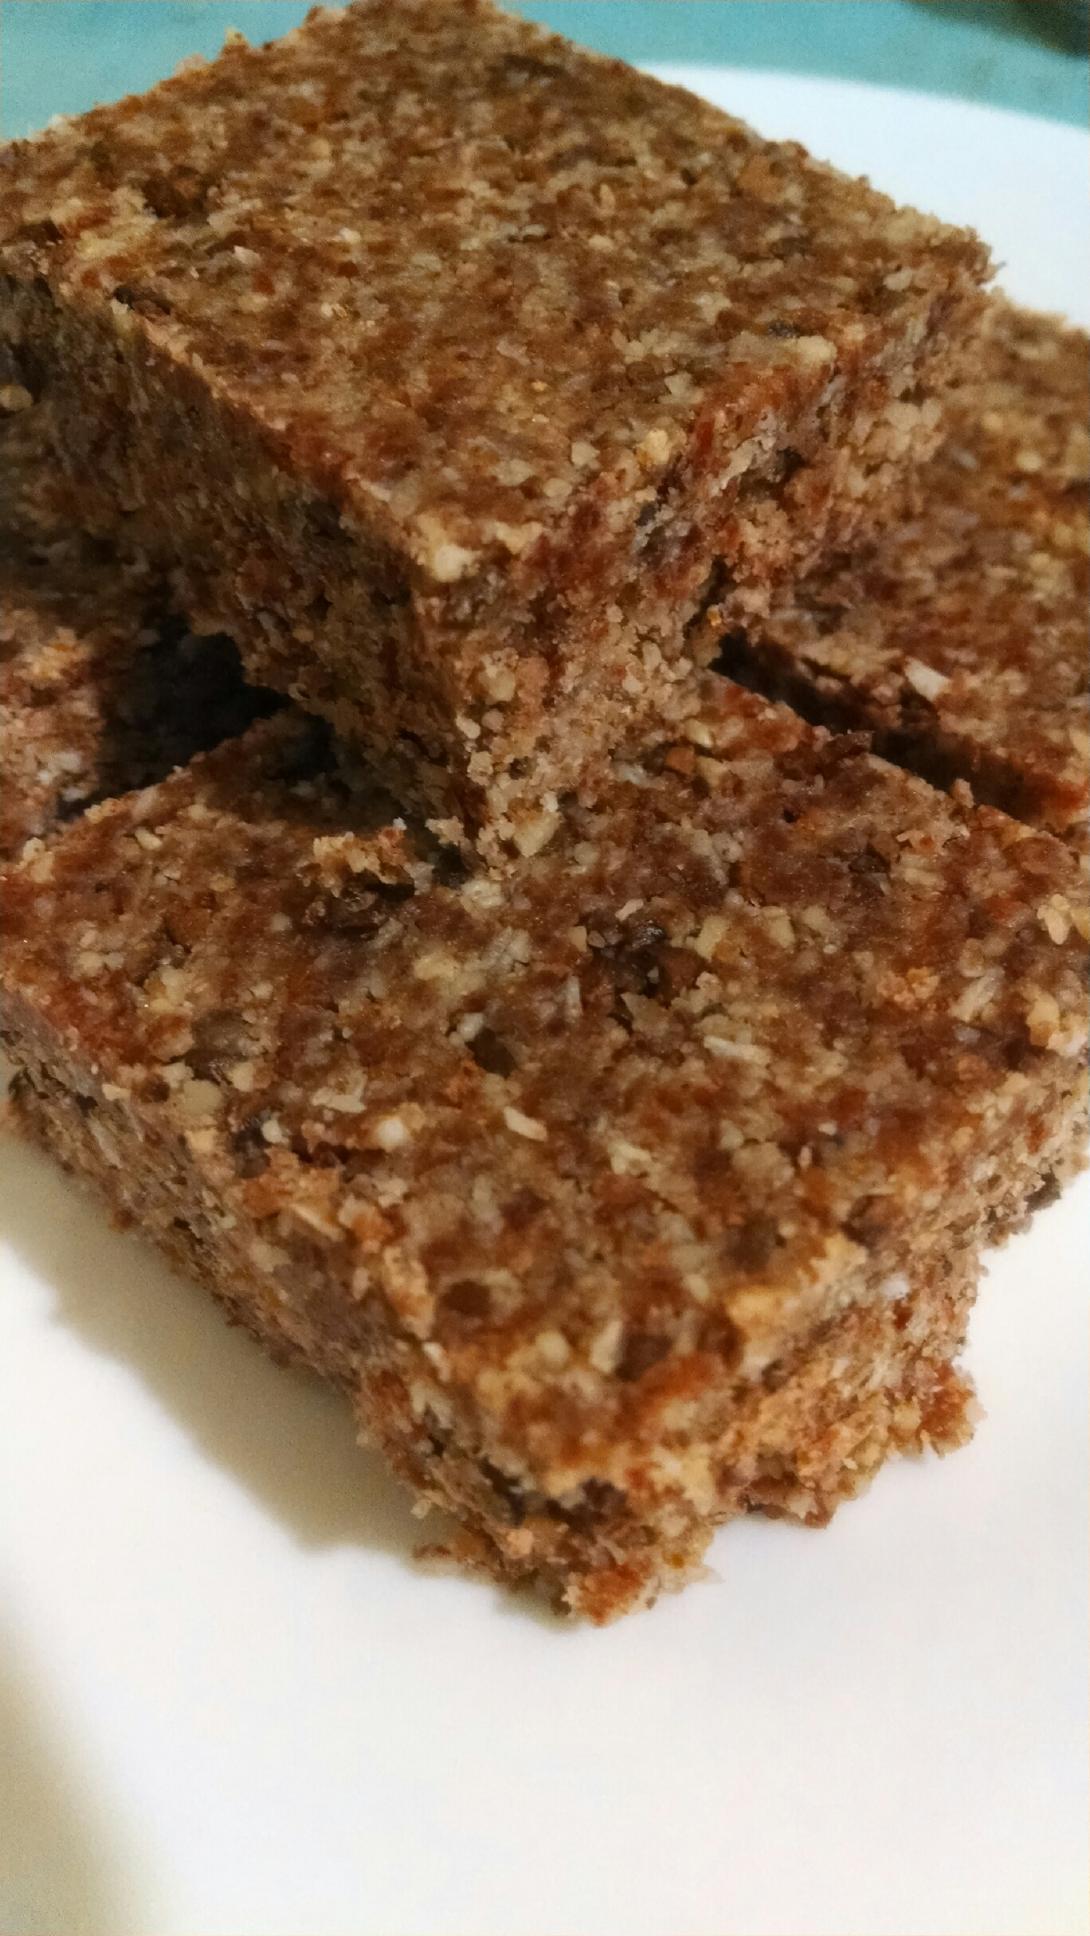 Almond & Fruit Chocolate Energy Bars cut into squares